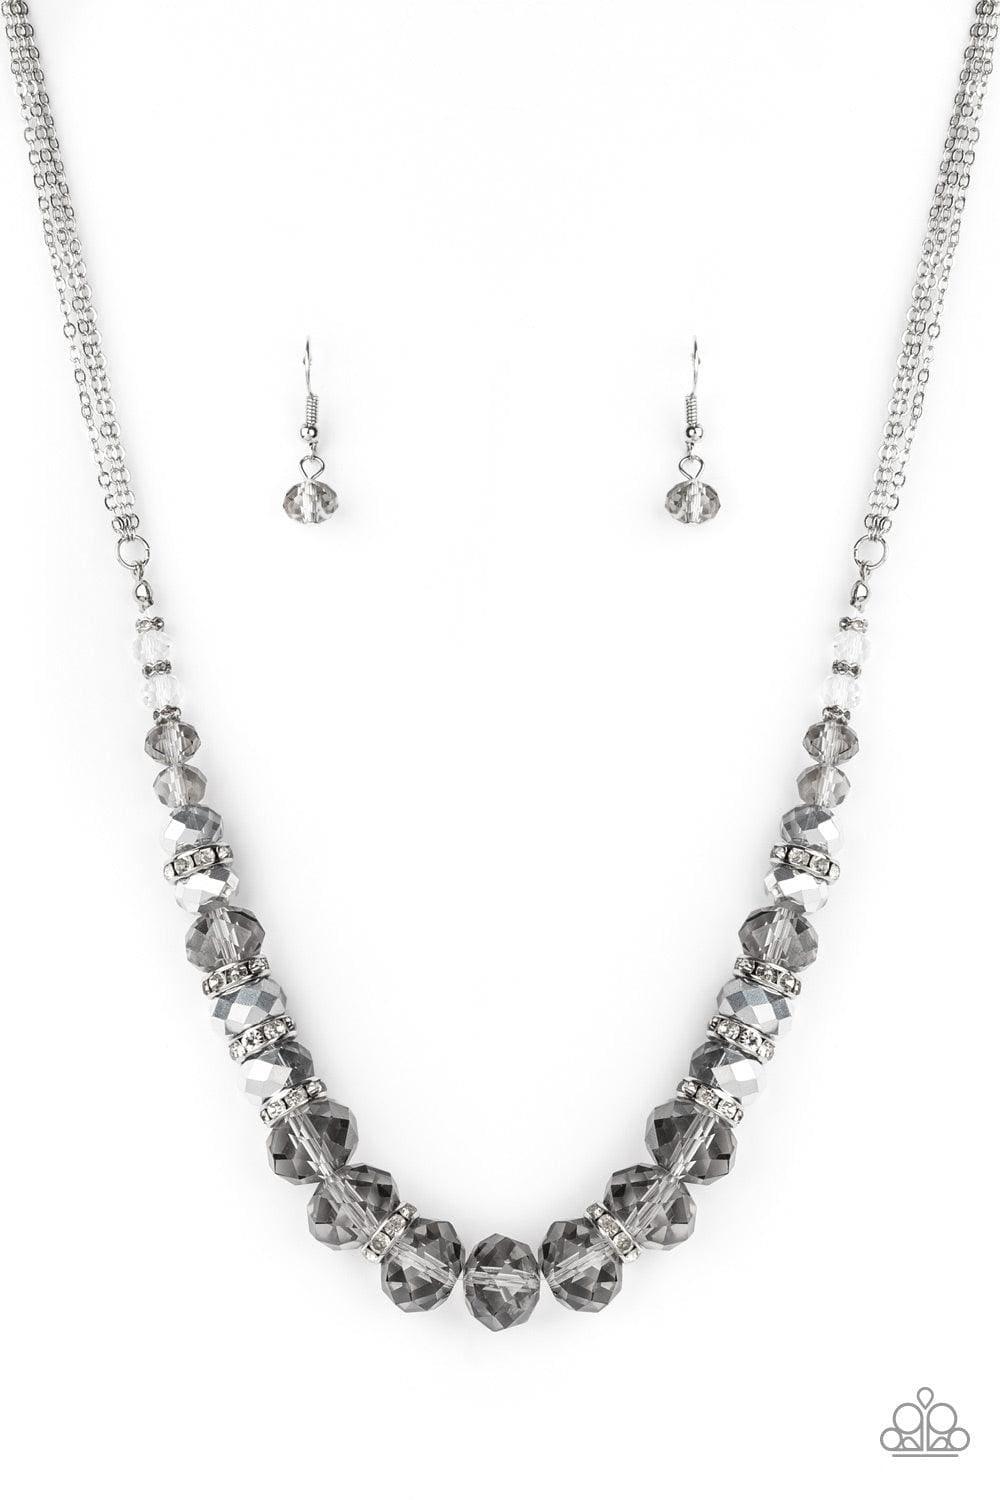 Paparazzi Accessories - Distracted By Dazzle - Silver Necklace - Bling by JessieK